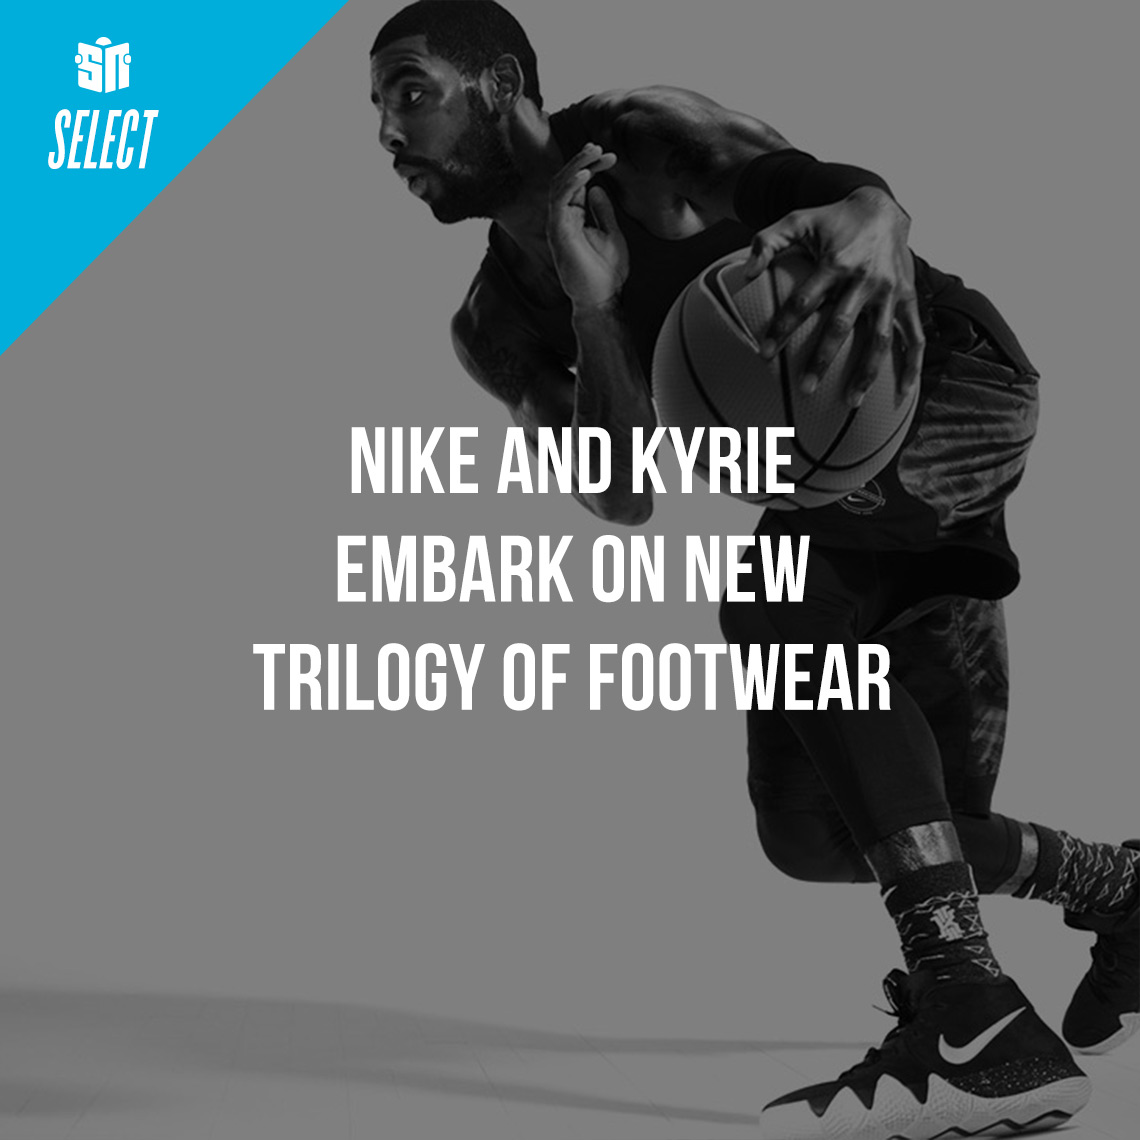 Kyrie Irving And Ben Nethongkome Embark On New Trilogy With The Nike Kyrie 4